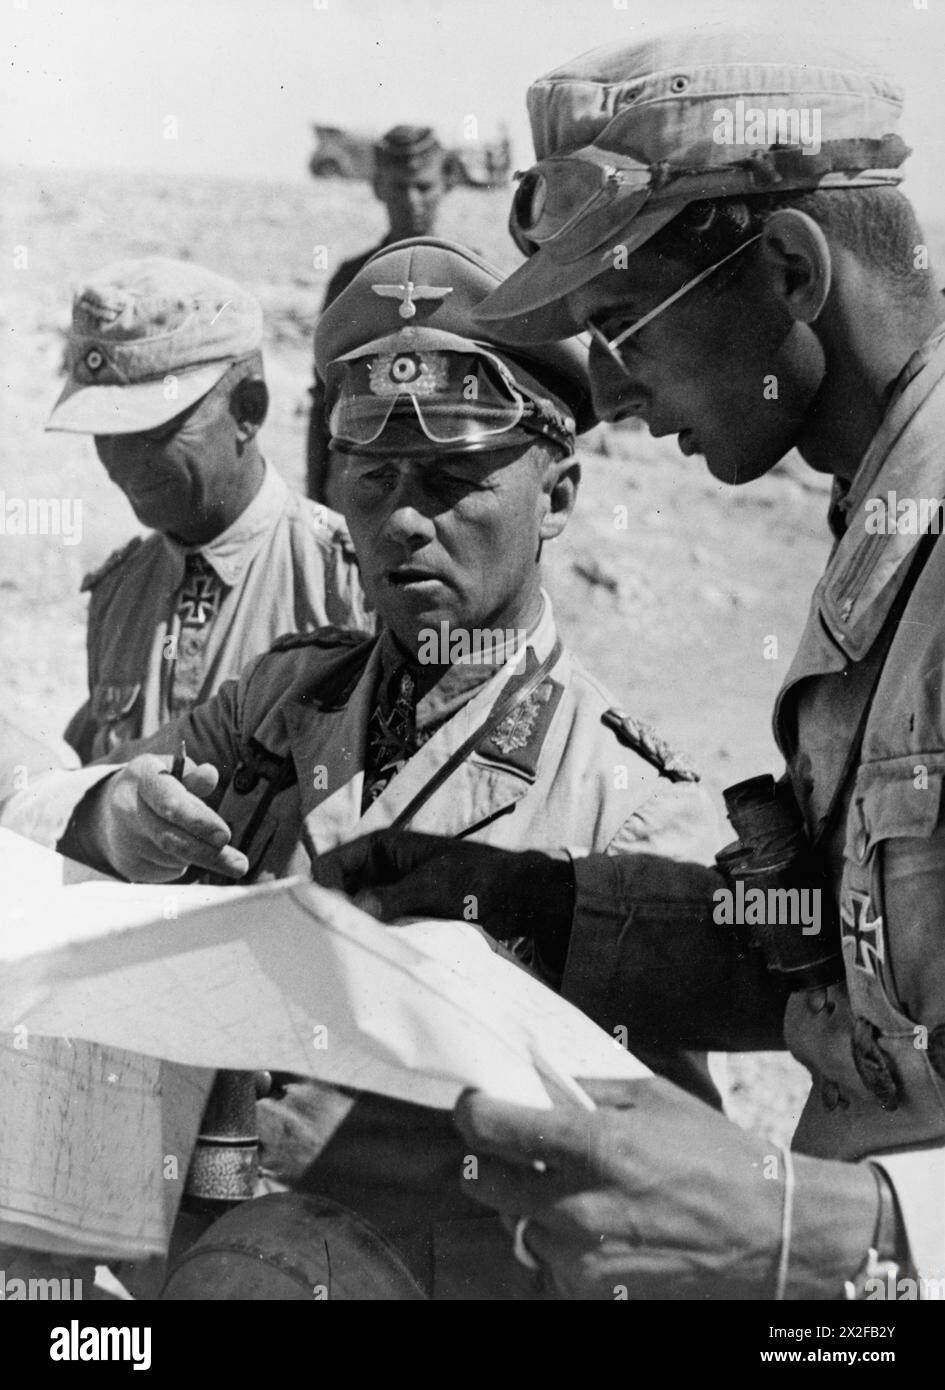 THE CAMPAIGN IN NORTH AFRICA 1940-1943: PERSONALITIES - Field Marshal Erwin Rommel, Commander of the German forces in North Africa, with his aides during the desert campaign Rommel, Erwin Johannes Eugen, German Army (Third Reich) Stock Photo